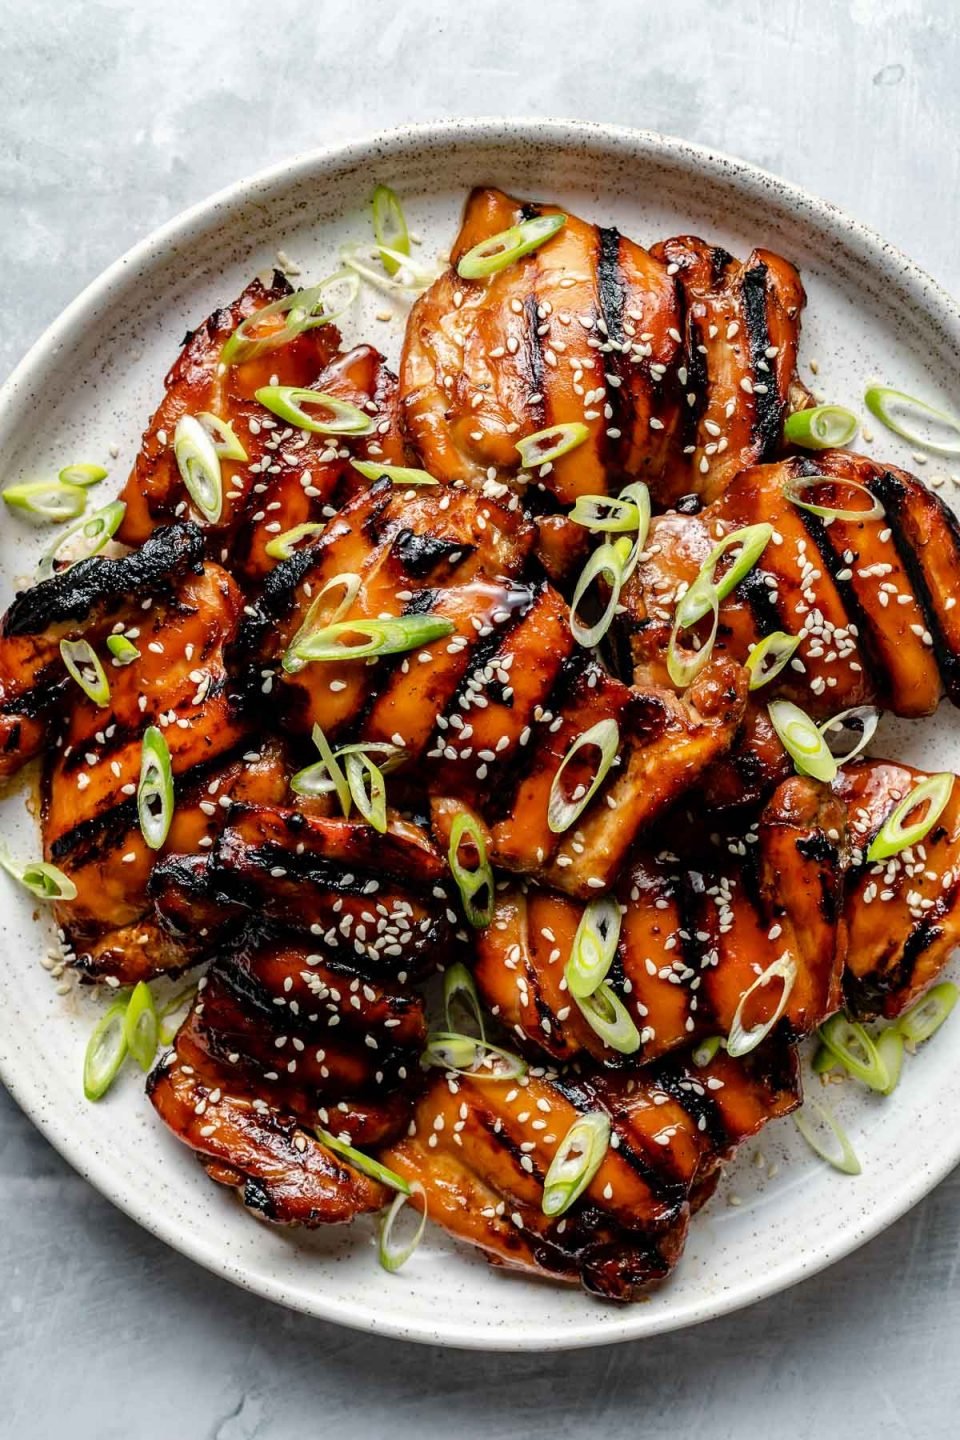 Grilled Teriyaki chicken thighs shown on a white speckled plate atop a light blue surface. The chicken is garnished with sliced green onion & sesame seeds.